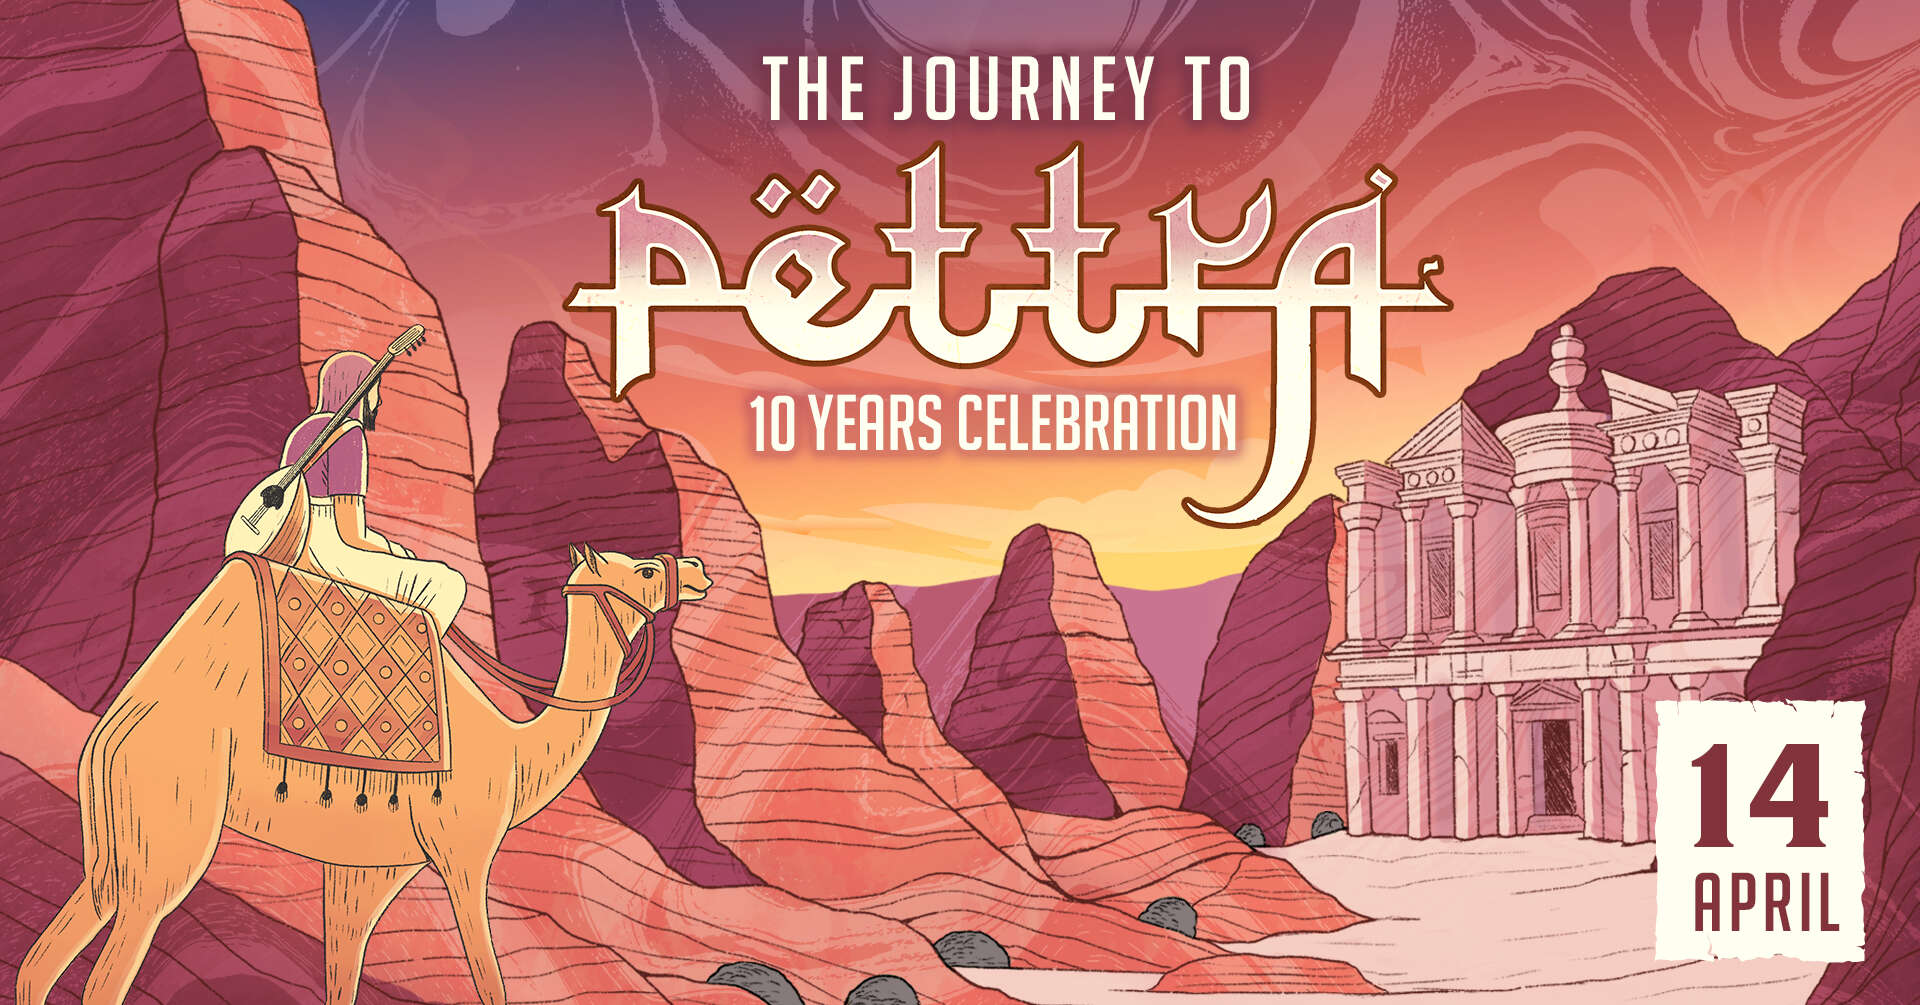 THE JOURNY TO PETTRA